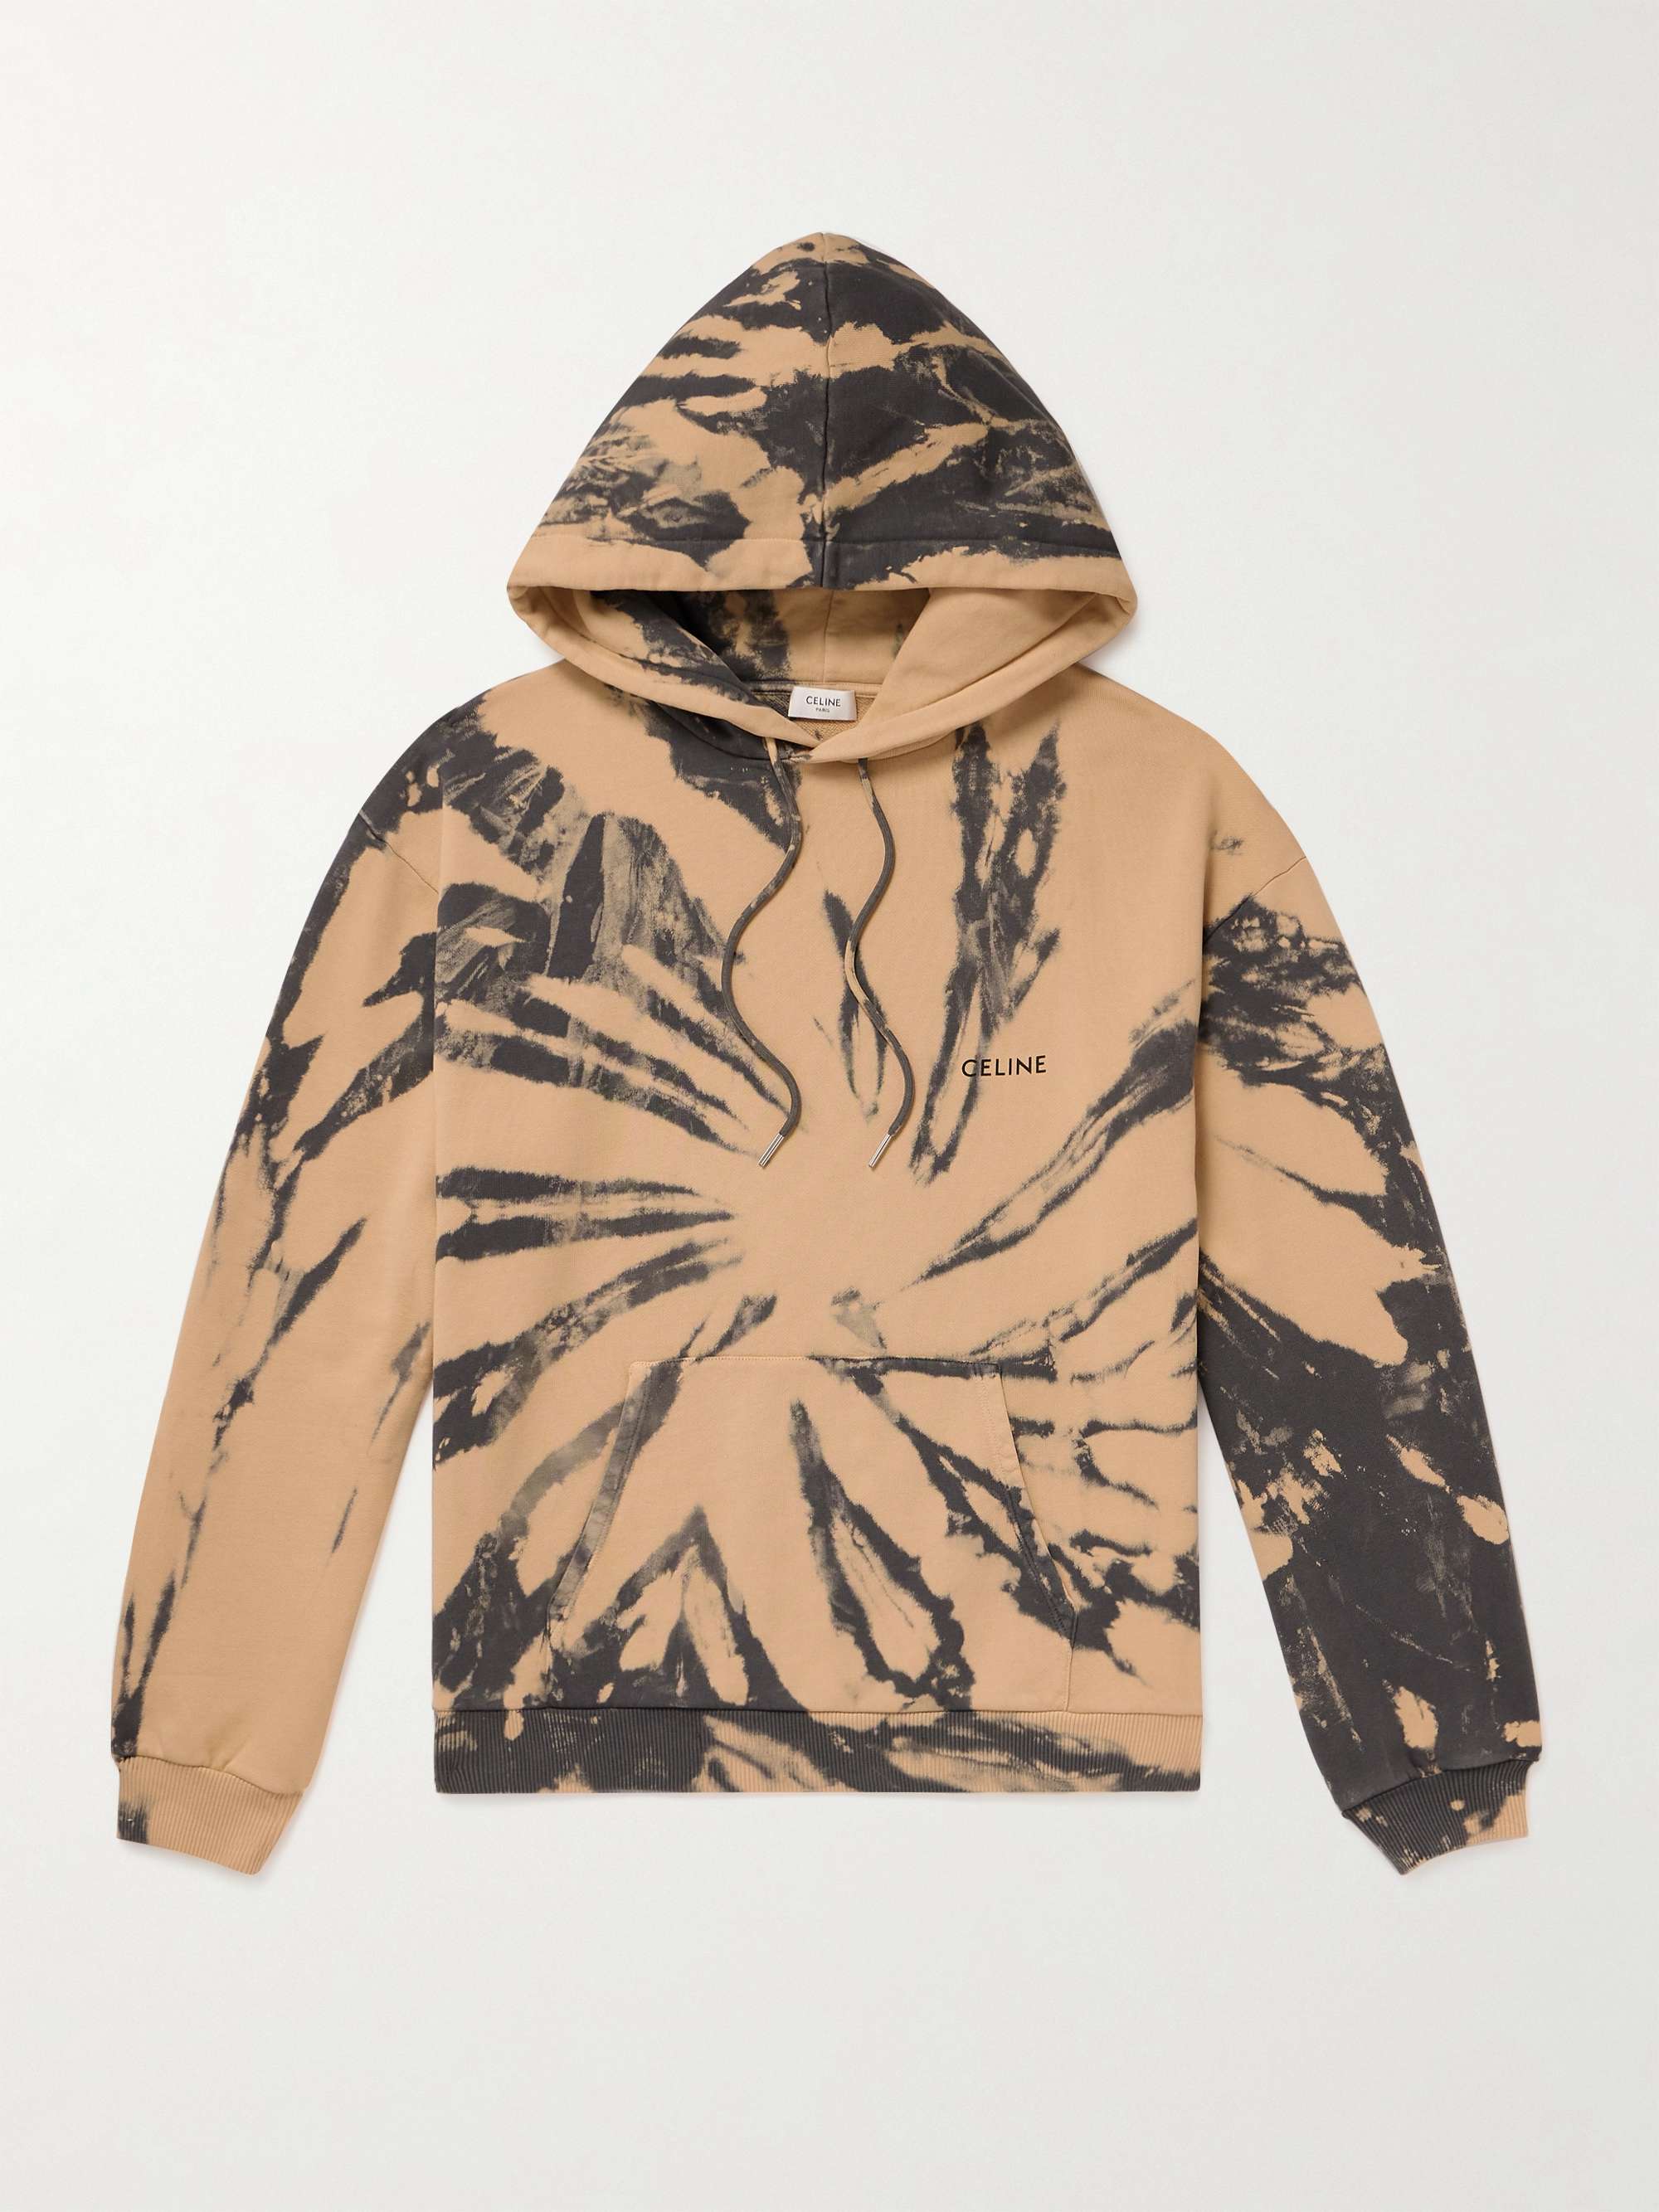 CELINE HOMME Logo-Print Tie-Dyed Cotton-Jersey Hoodie